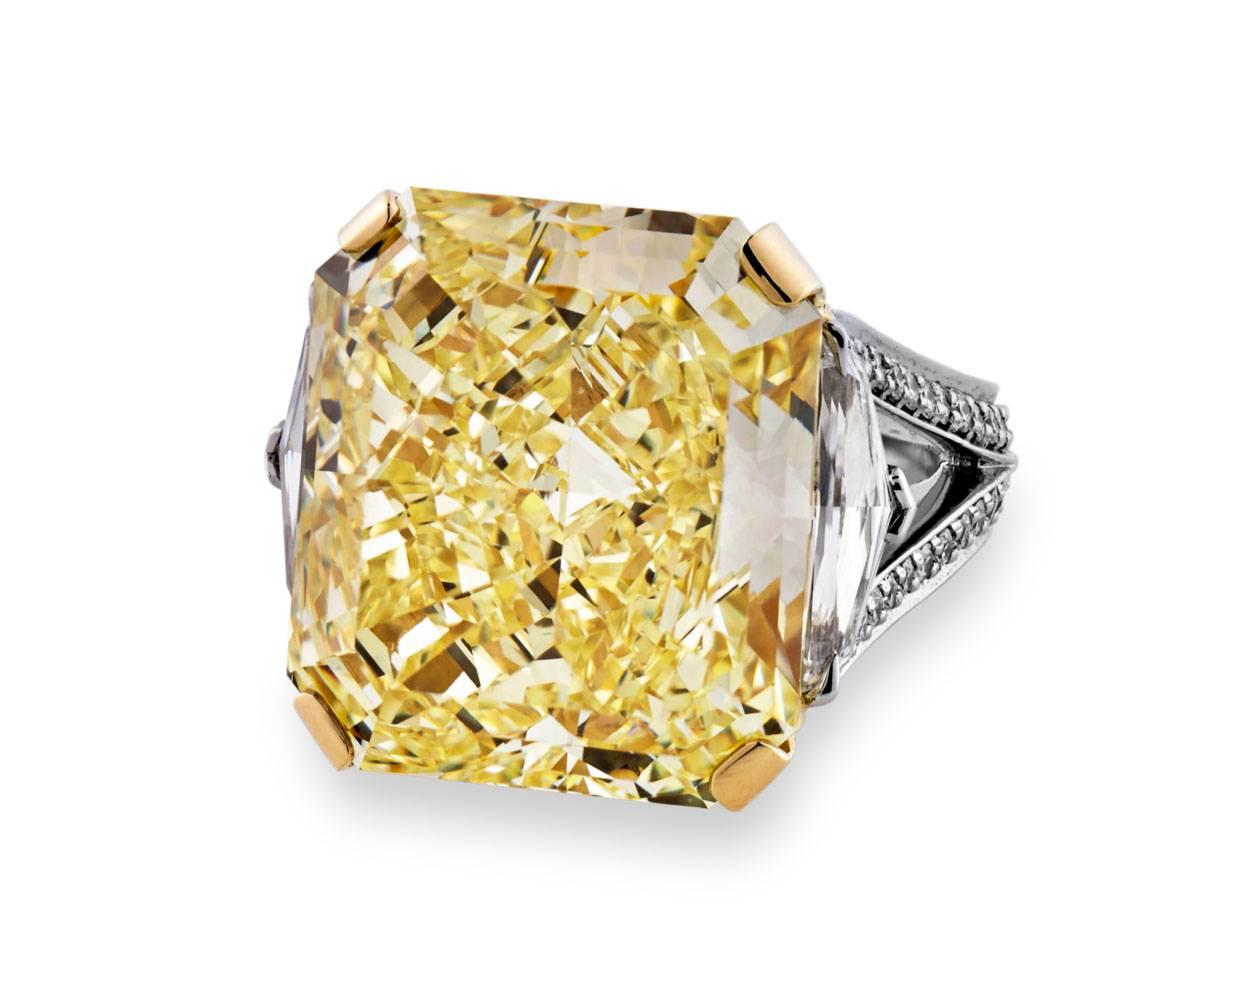 Displaying exceptional brilliance, this remarkably rare gemstone is one of the best fancy intense yellow diamonds on the market today. Weighing 21.30 carats, the diamond exhibits an intensity of color that is enhanced by its exquisite mixed cut.